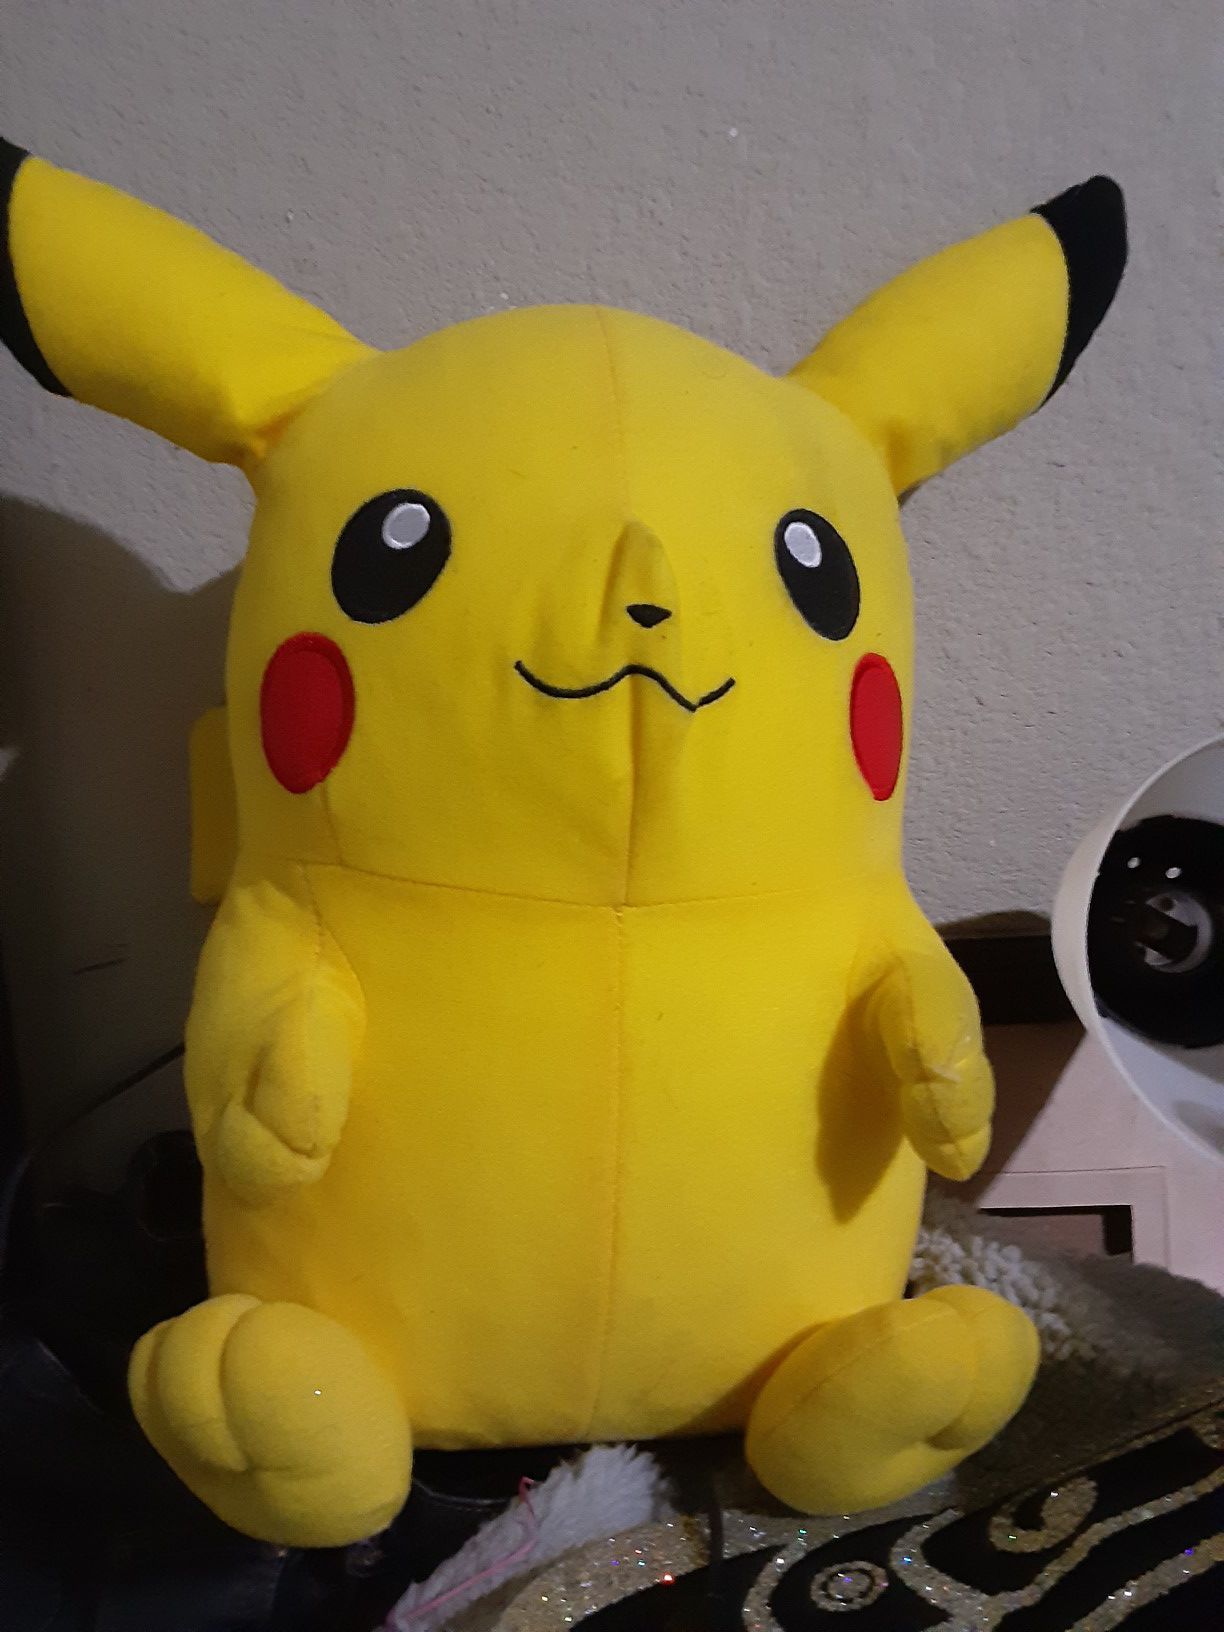 Pokemon stuff toy $10.00 cash only (serious buyers)